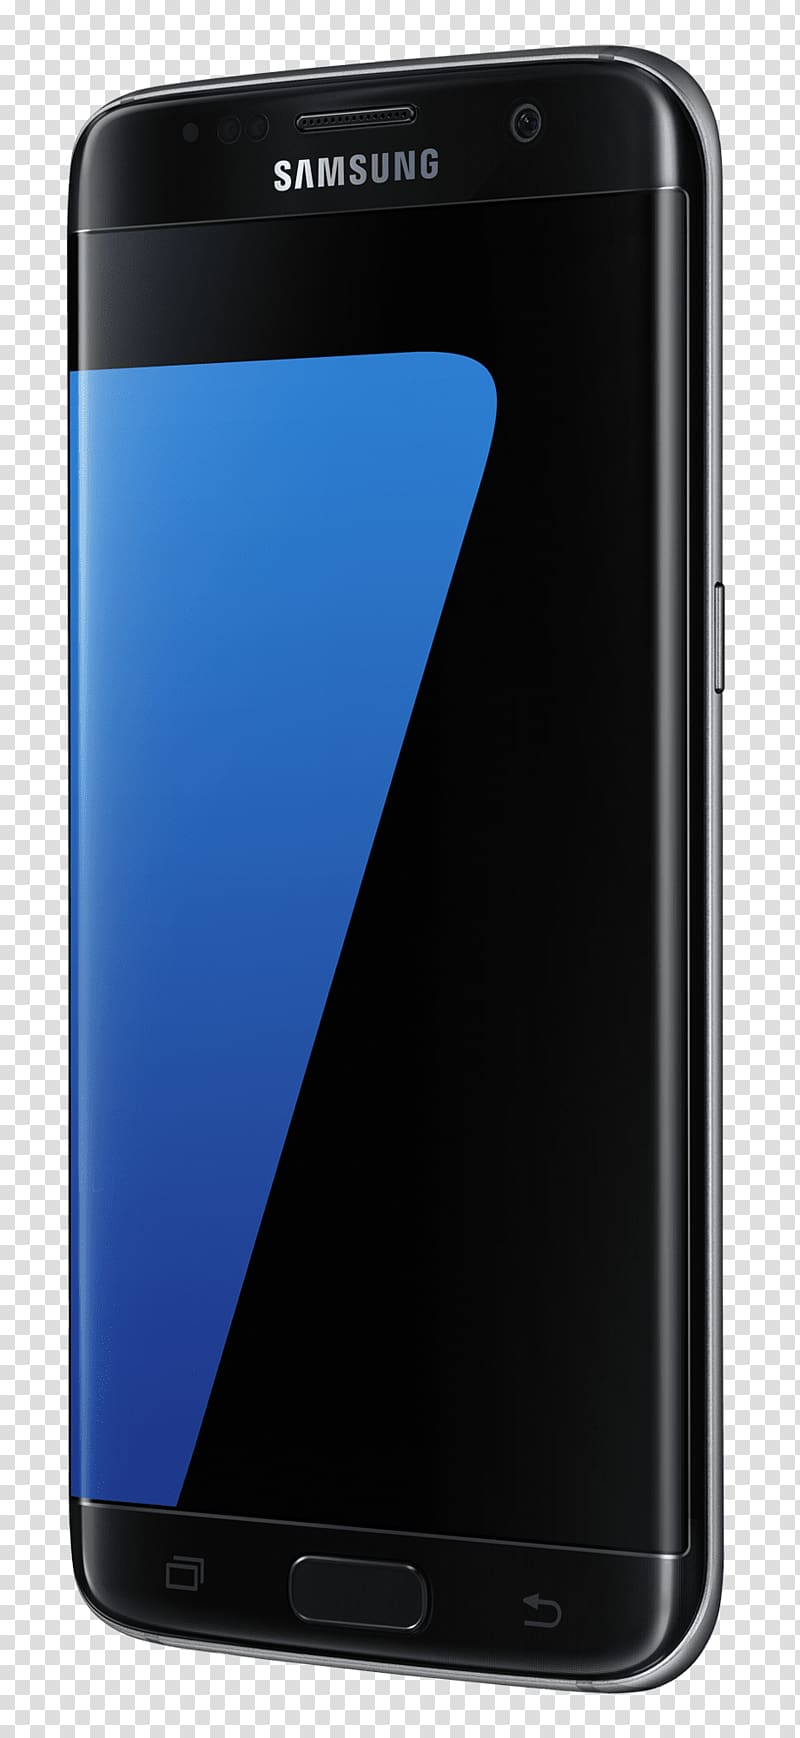 Samsung GALAXY S7 Edge Samsung Galaxy S9 Samsung Galaxy S6 Android, Samsung Galaxy S7 Edge transparent background PNG clipart